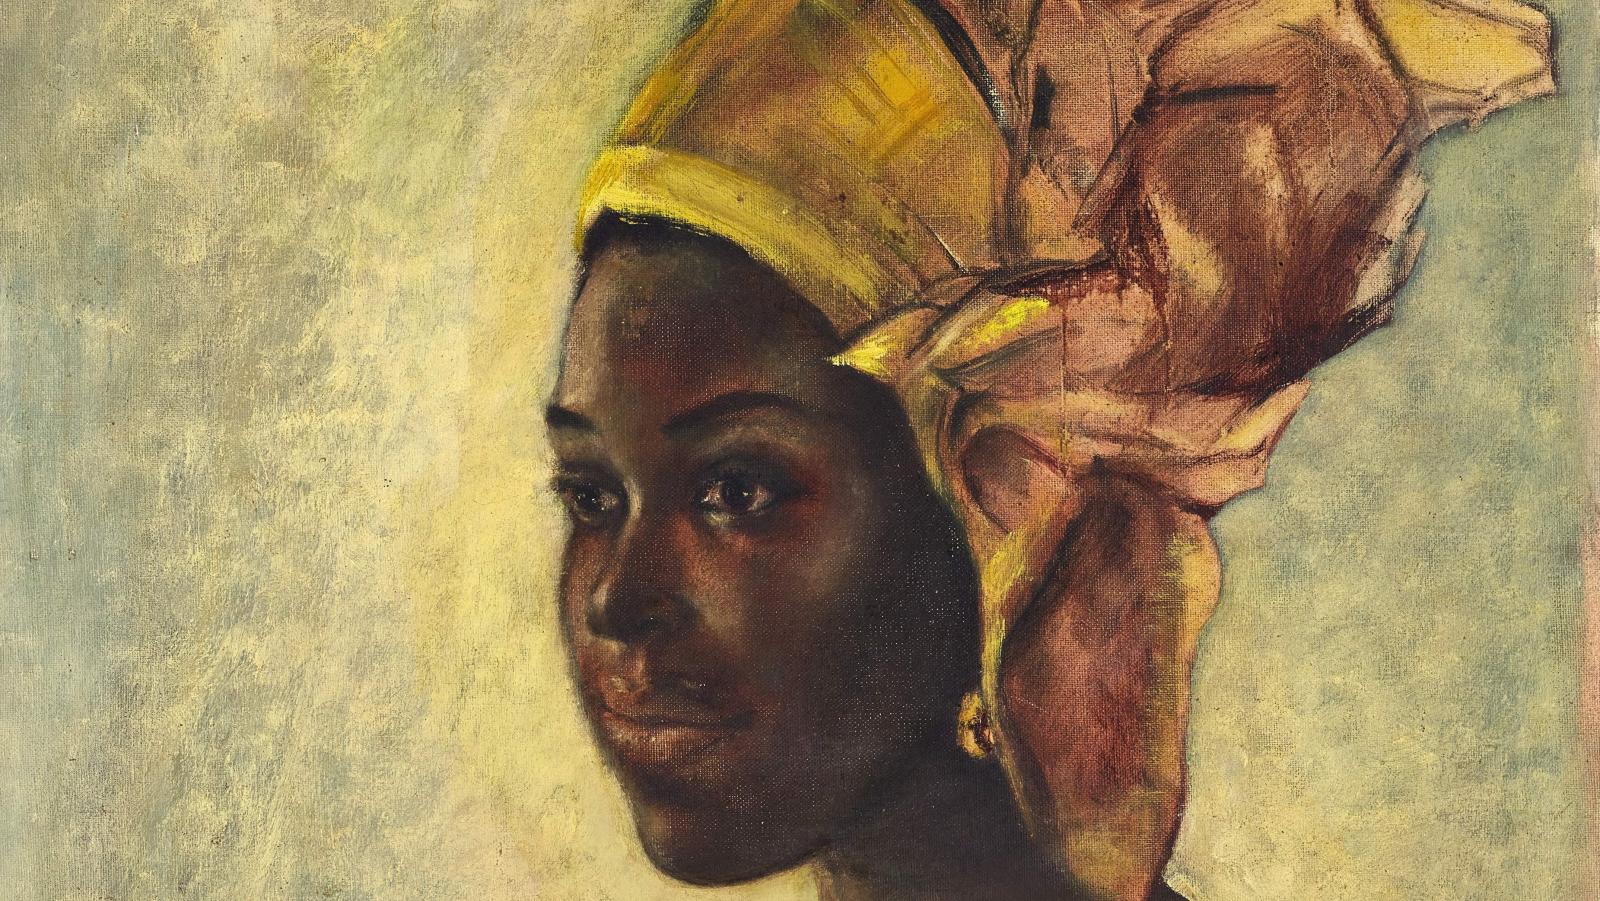 Ben Enwonwu painting sold for $1.4 million at an auction.